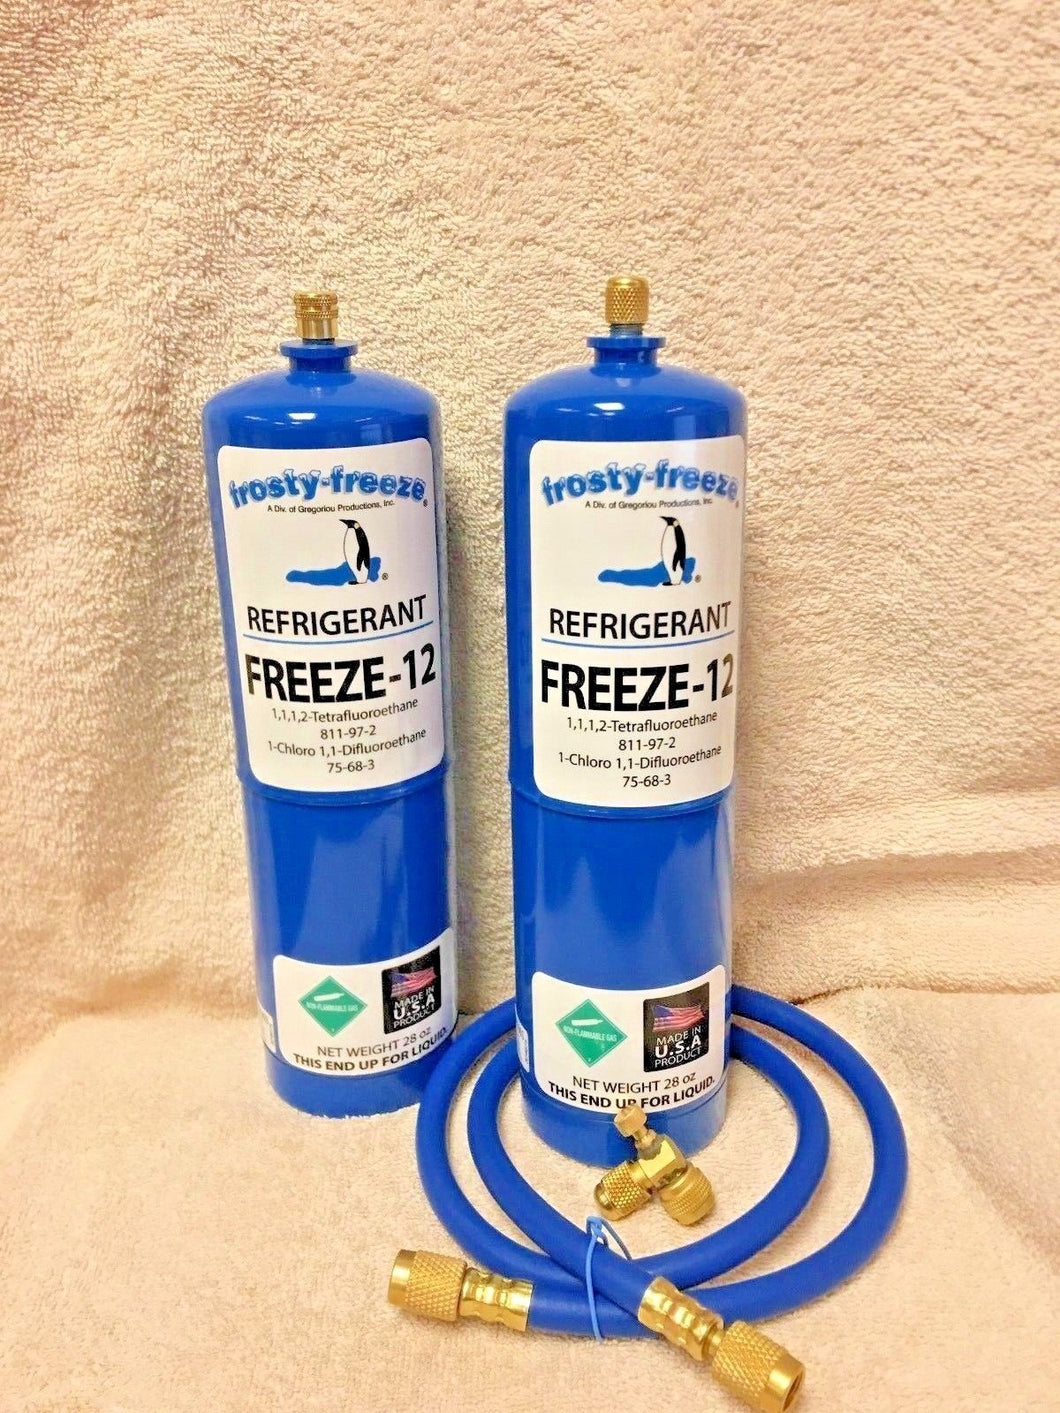 FREEZE 12, R-12, R12 REPLACEMENT, NO CFC'S,(2) 28 oz. Cans, On/Off Valve, Hose